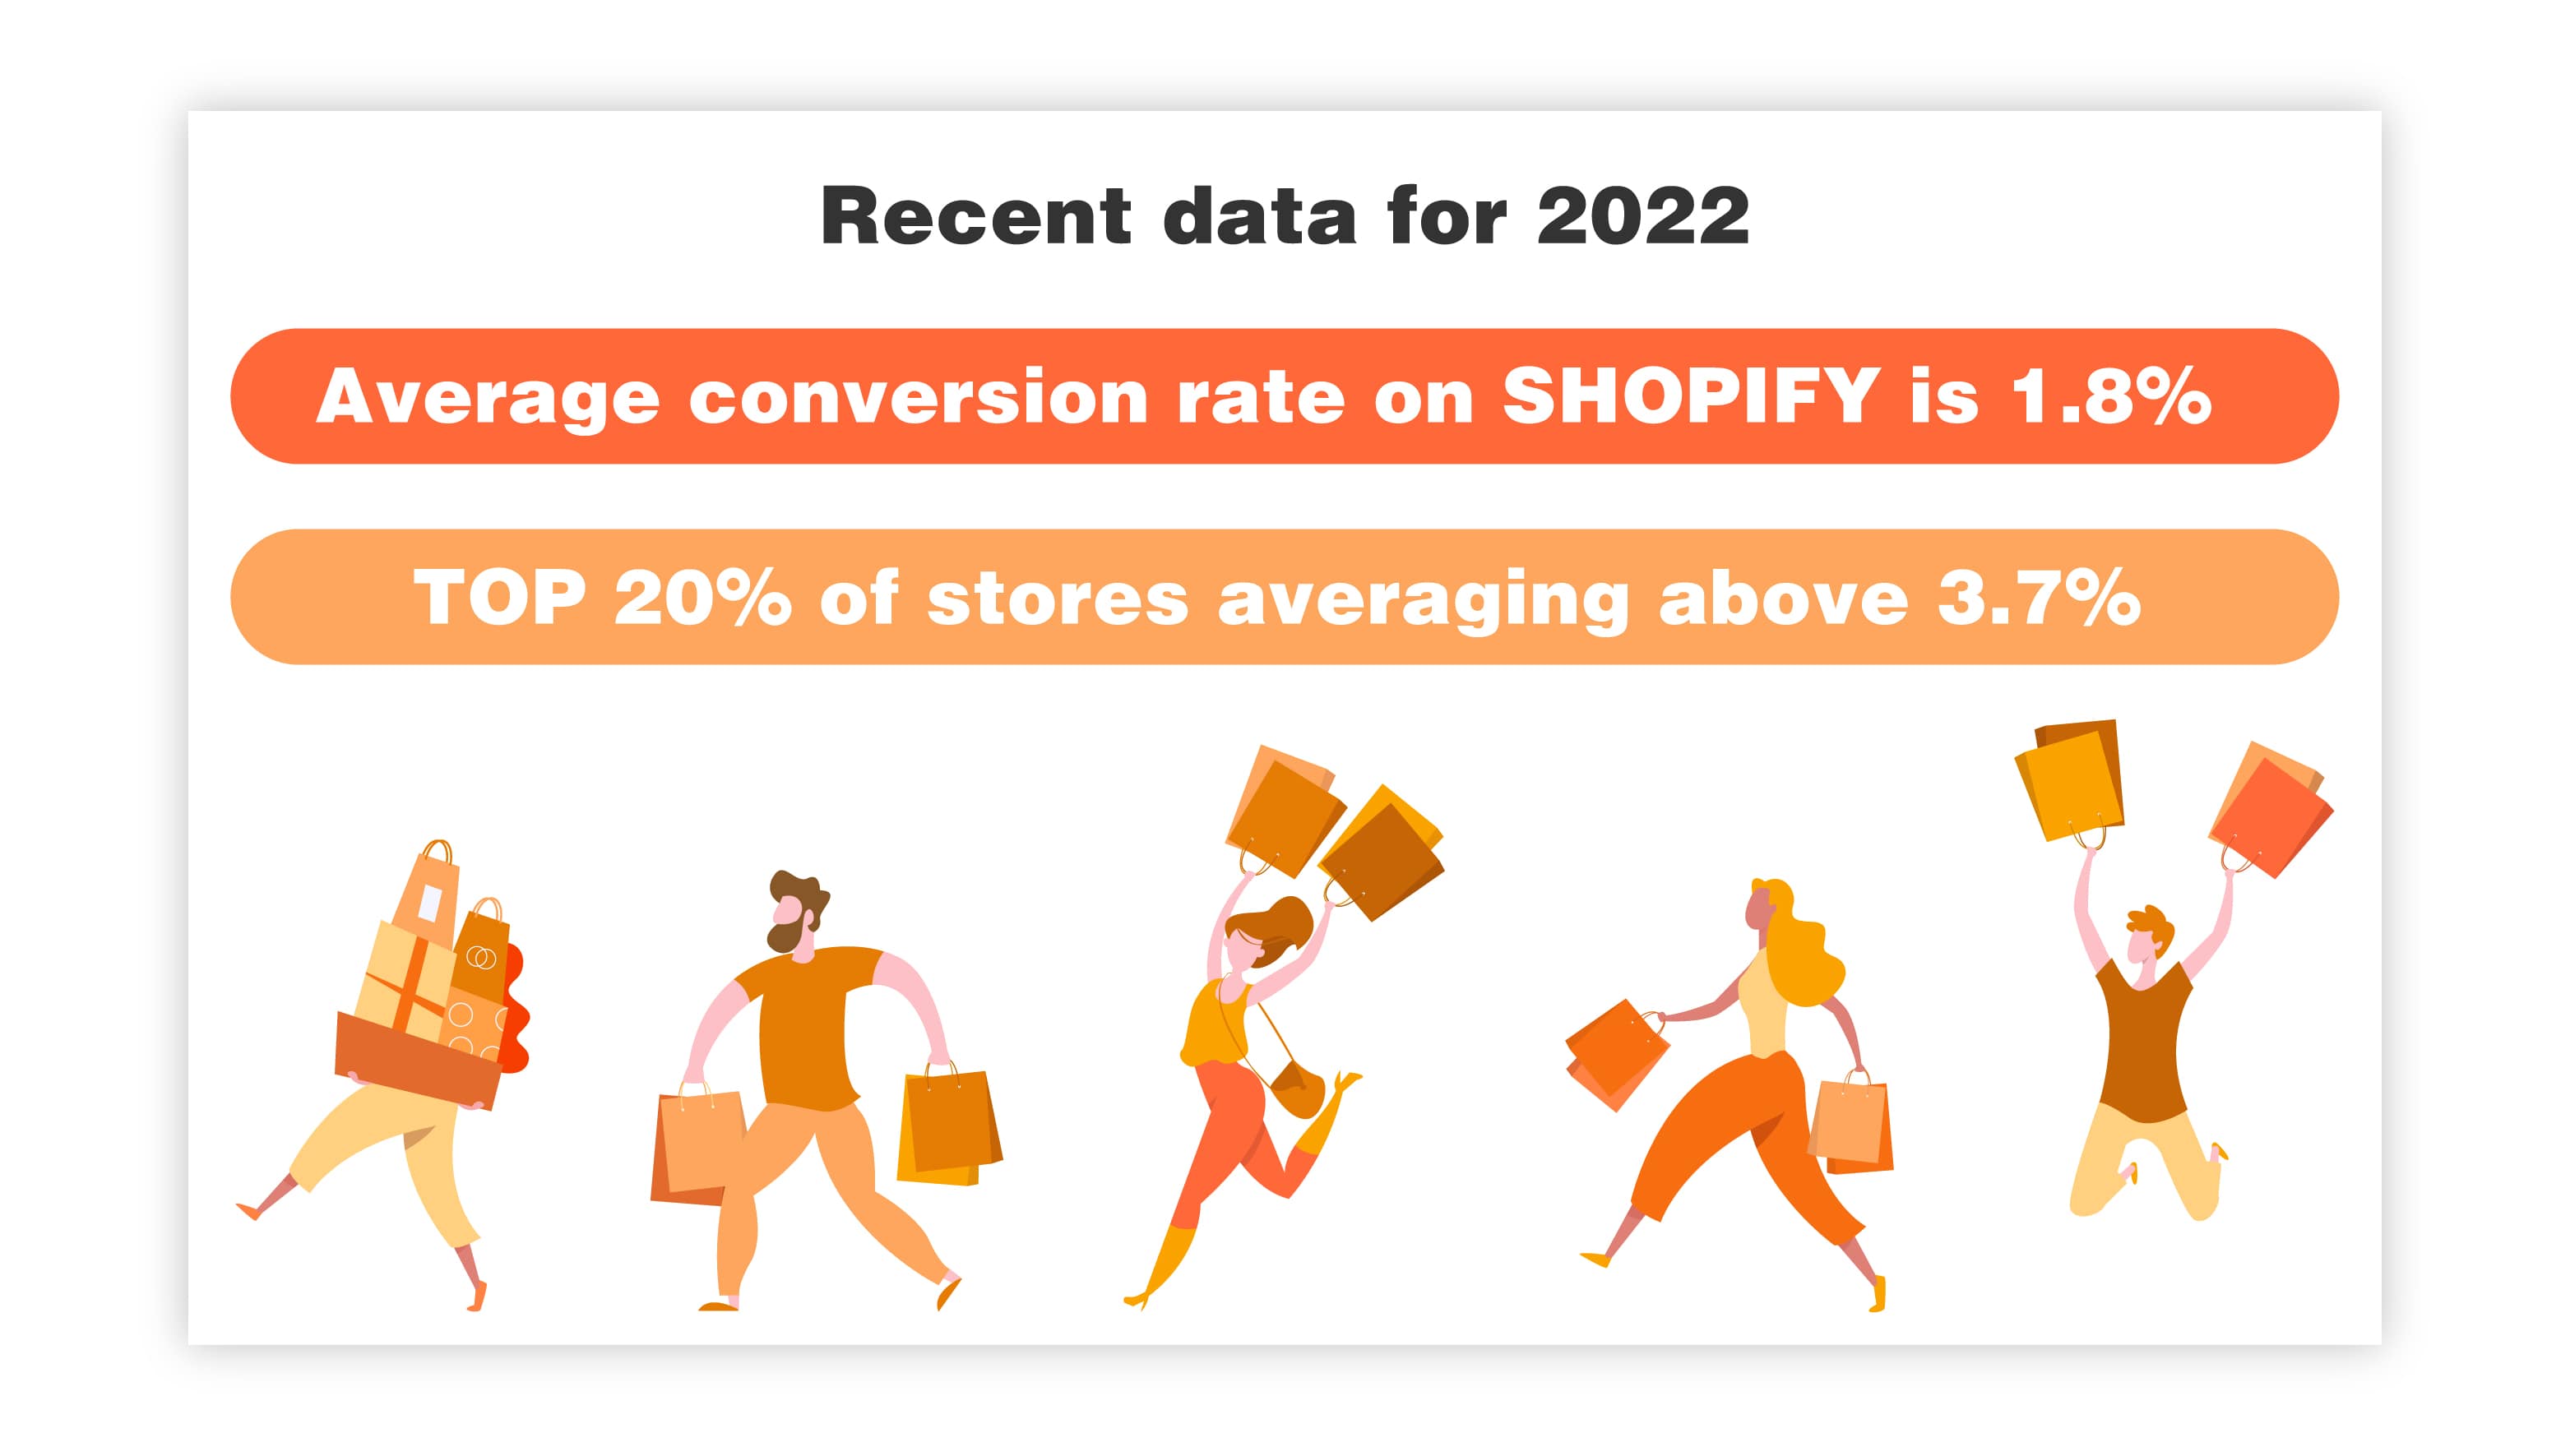 2 - Average conversion rate on SHOPIFY